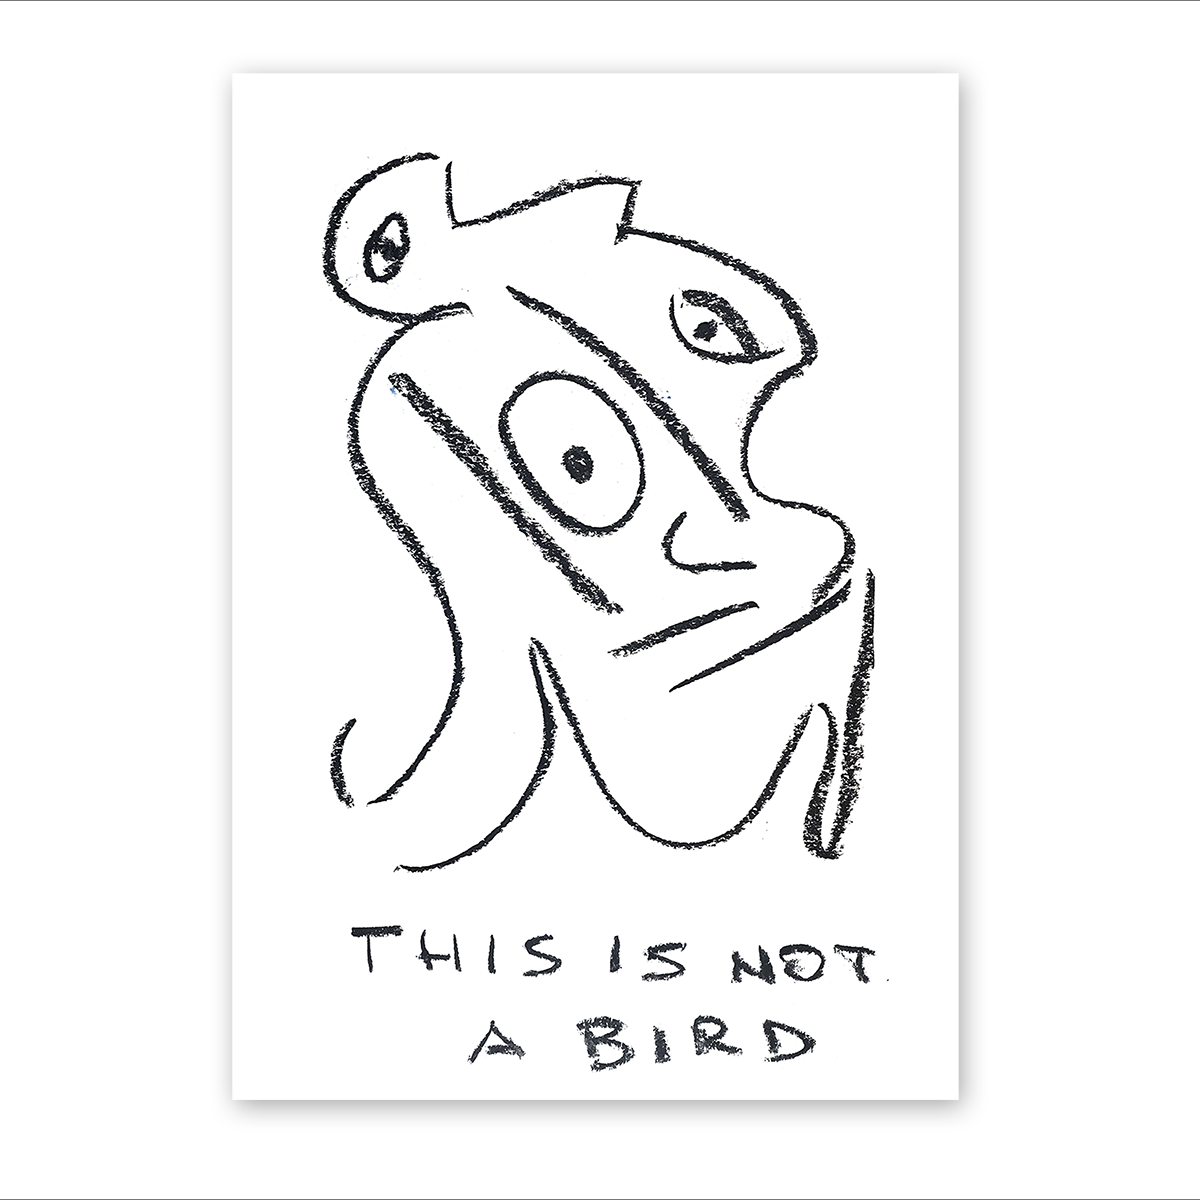 This is not a bird